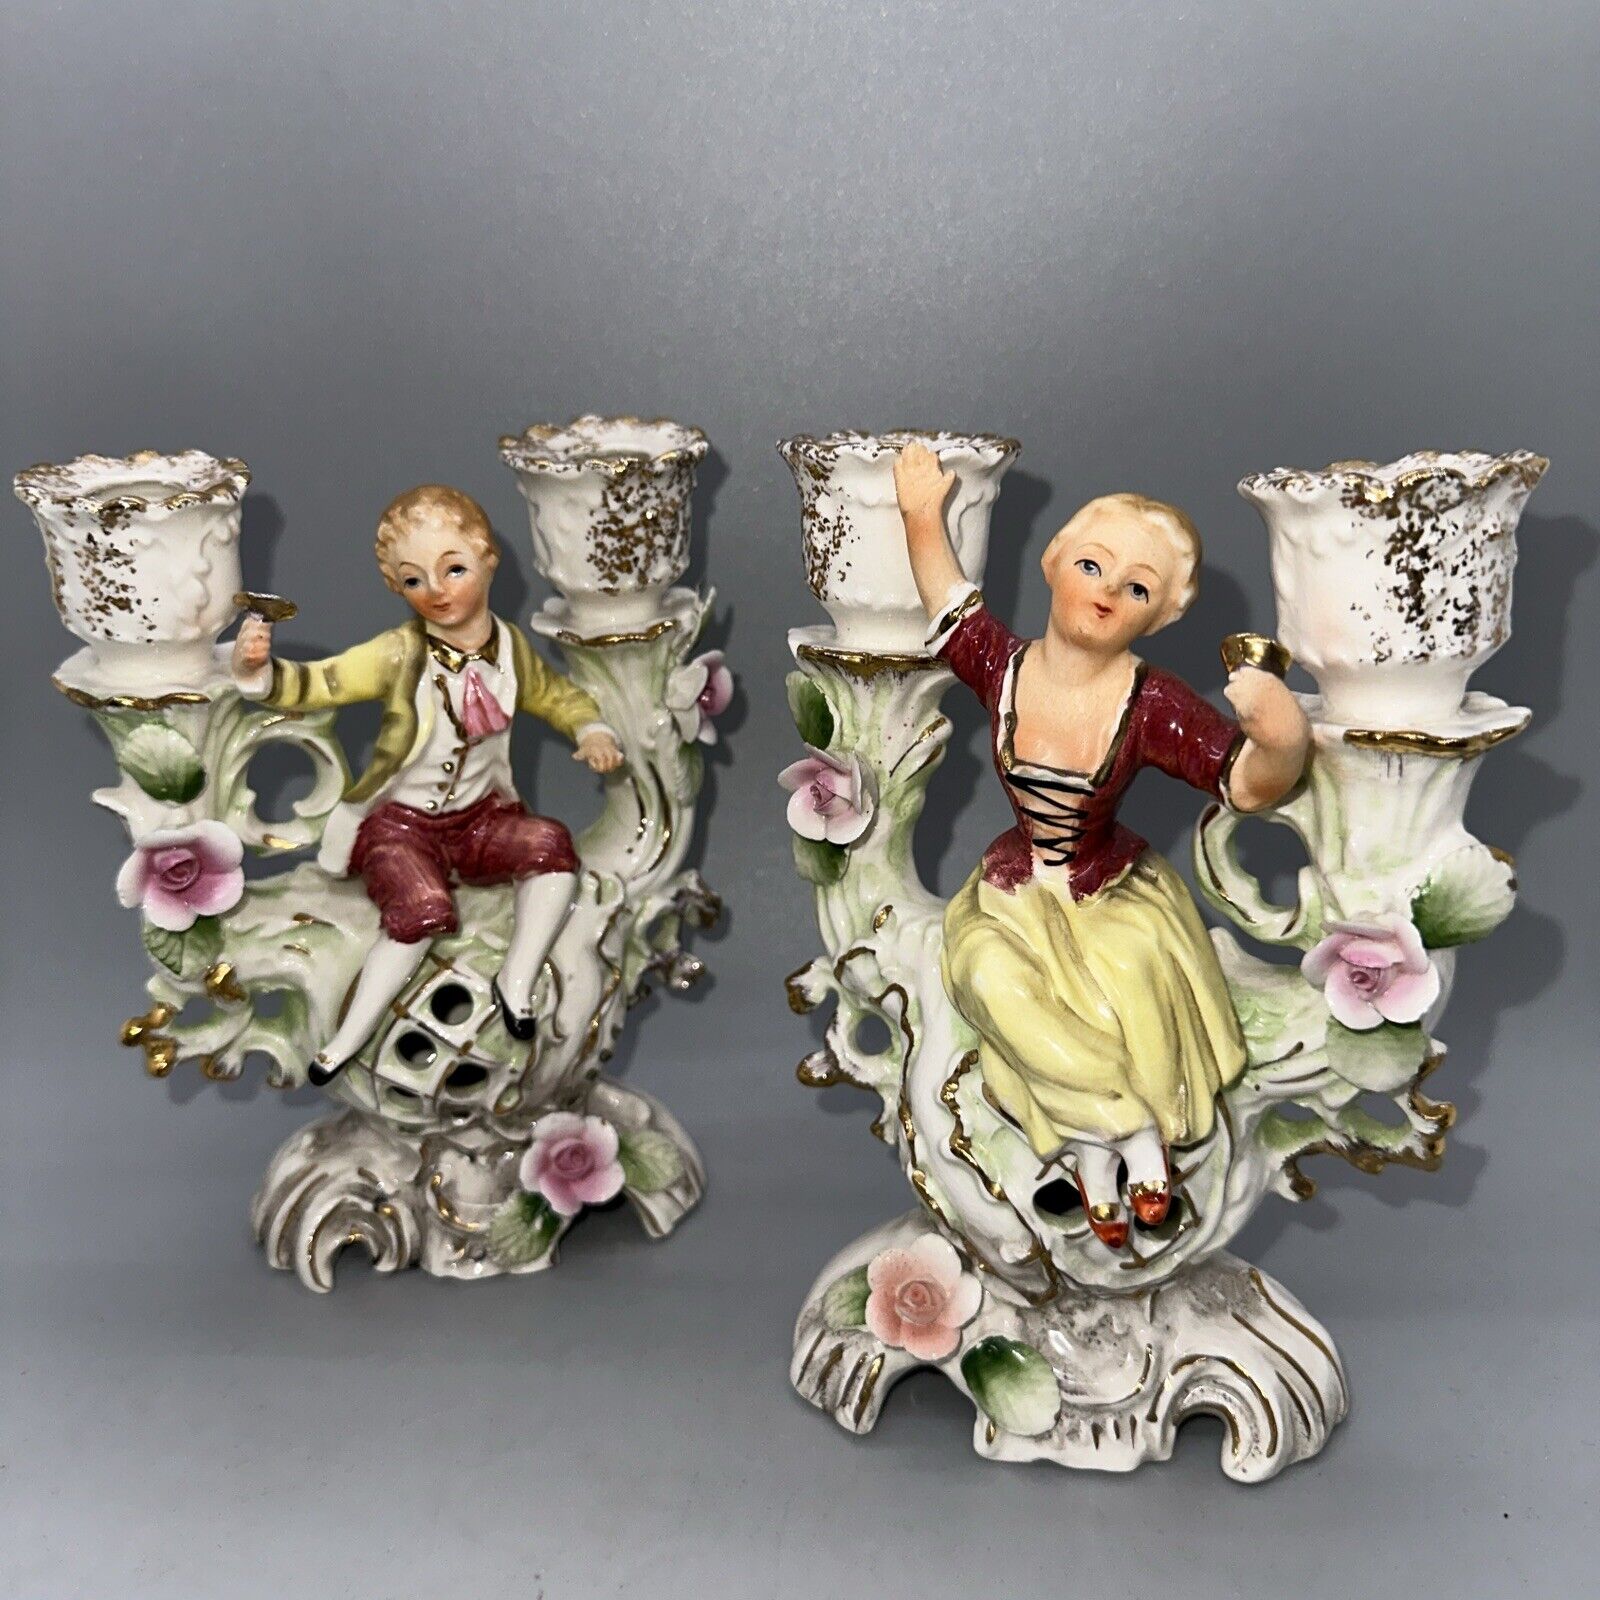 SET OF 2 UCAGCO JAPAN DOUBLE CANDLESTICK HOLDERS VICTORIAN BOY AND GIRL